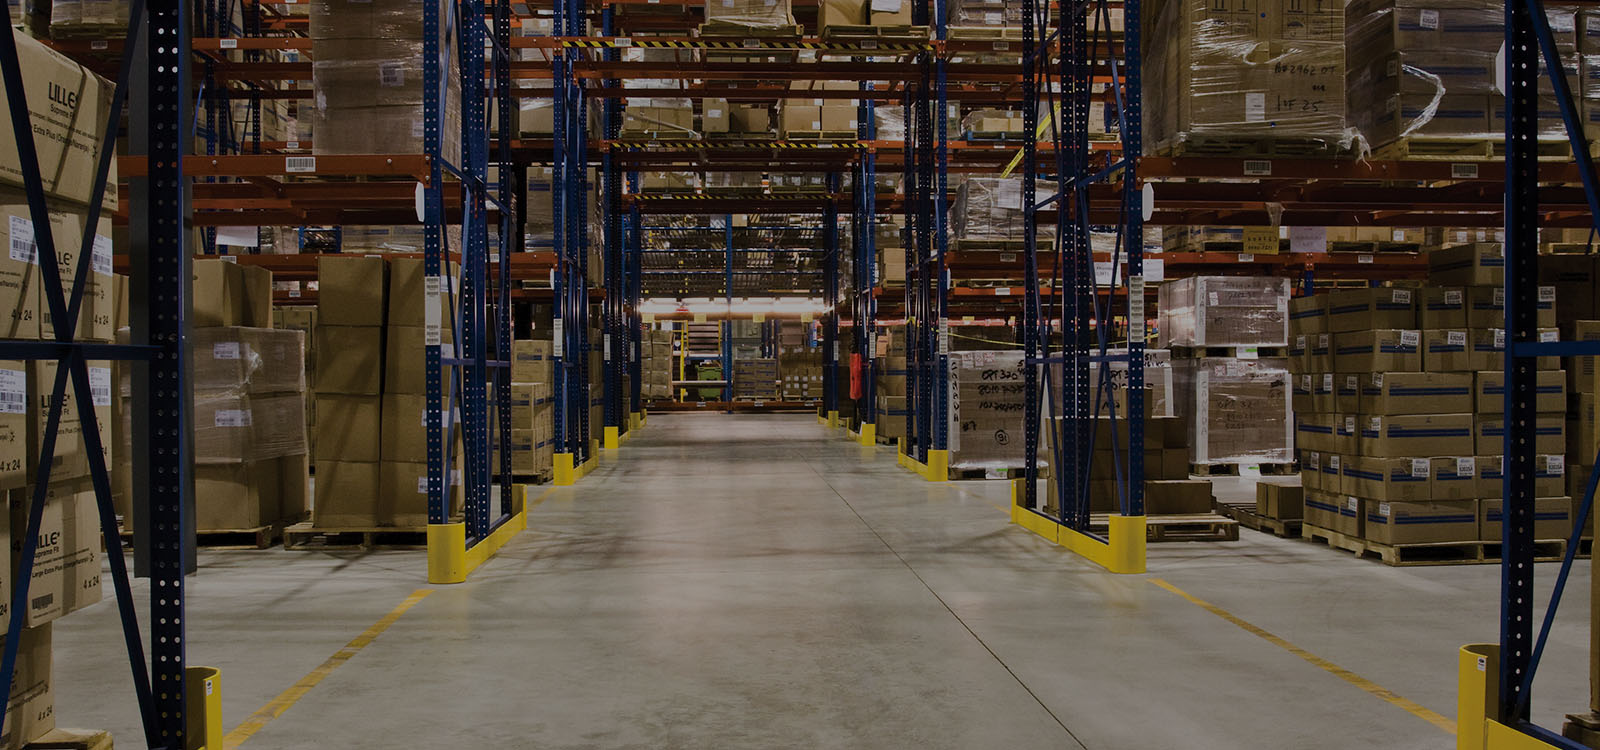 The Warehousing Sector Is On The Rise